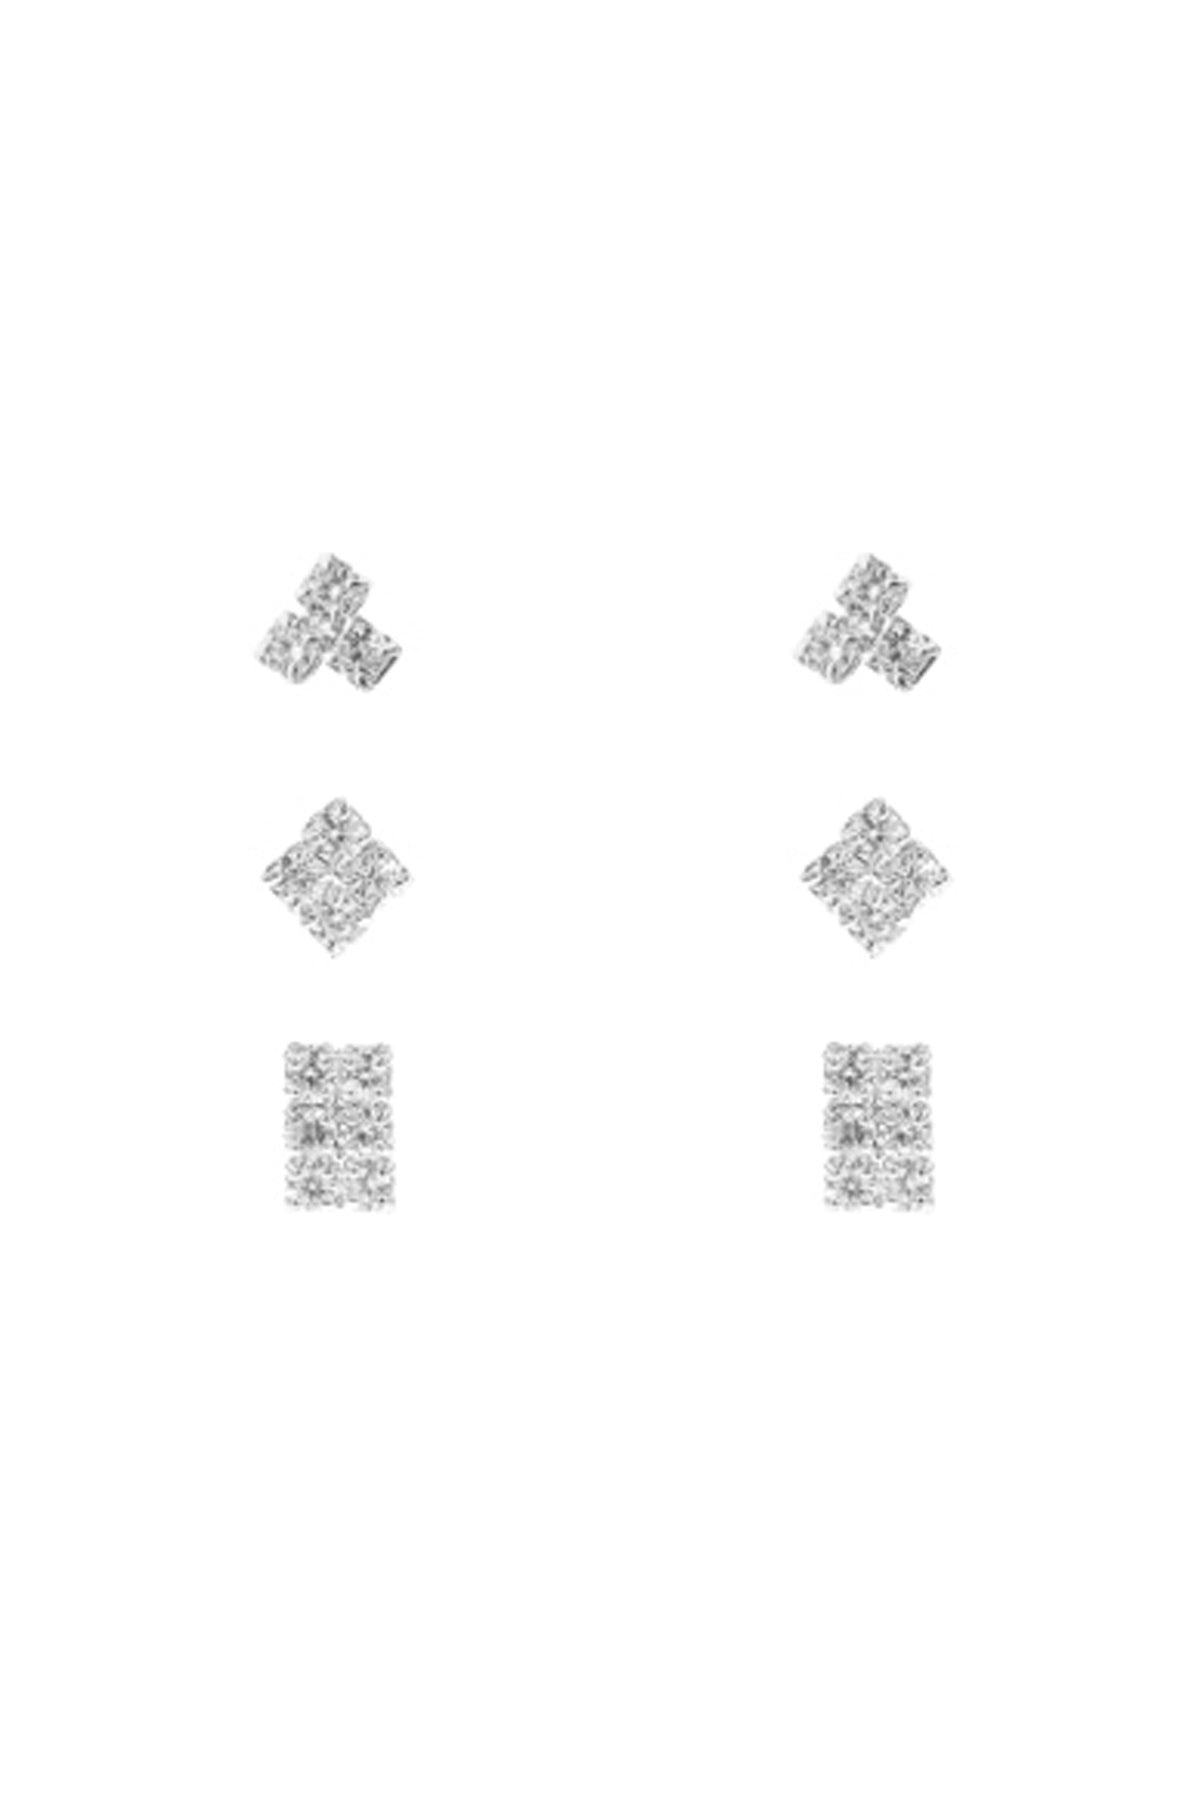 CUBIC ZIRCONIA 3 PAIRS SQUARE SET EARRINGS/6PCS (NOW $ 1.75 ONLY!)